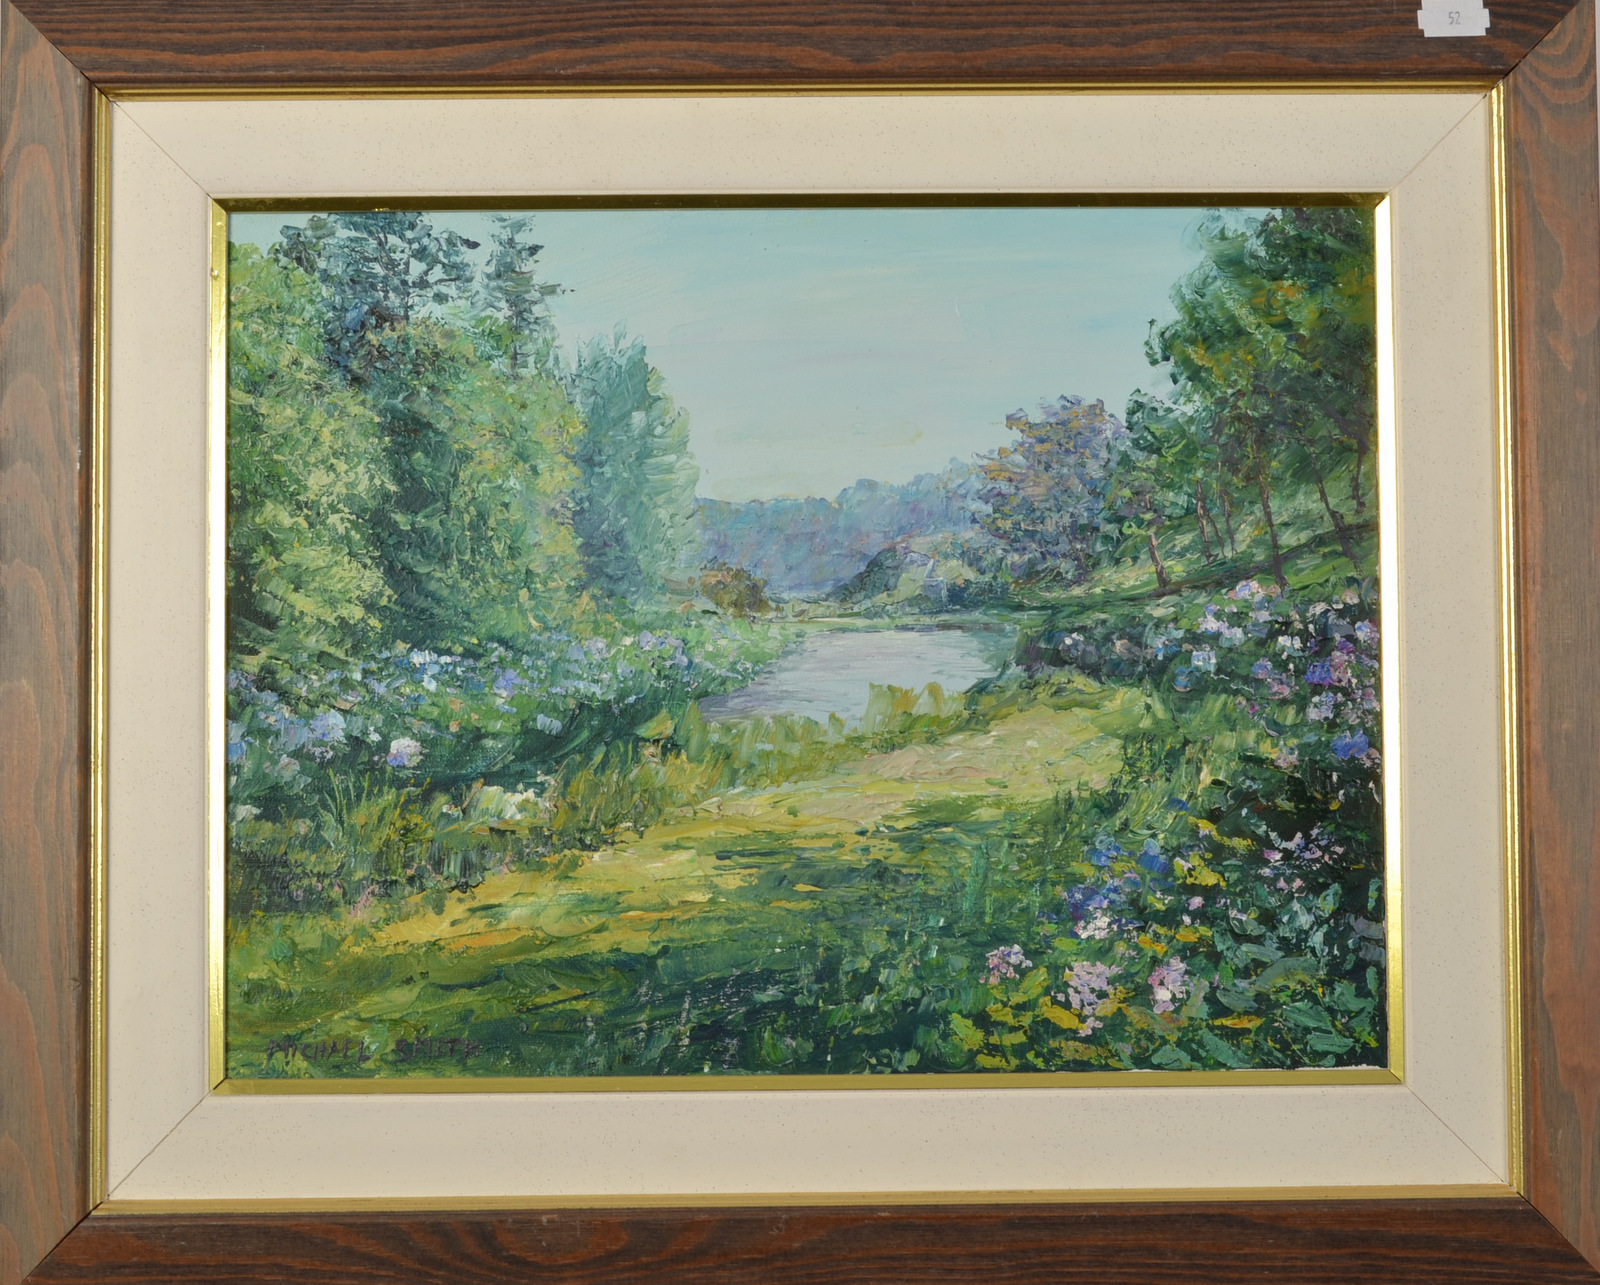 MICHAEL SMITH Cornish Countryside Oil on canvas Signed Gallery certificate 25 x 30cm plus 2 other - Image 3 of 4